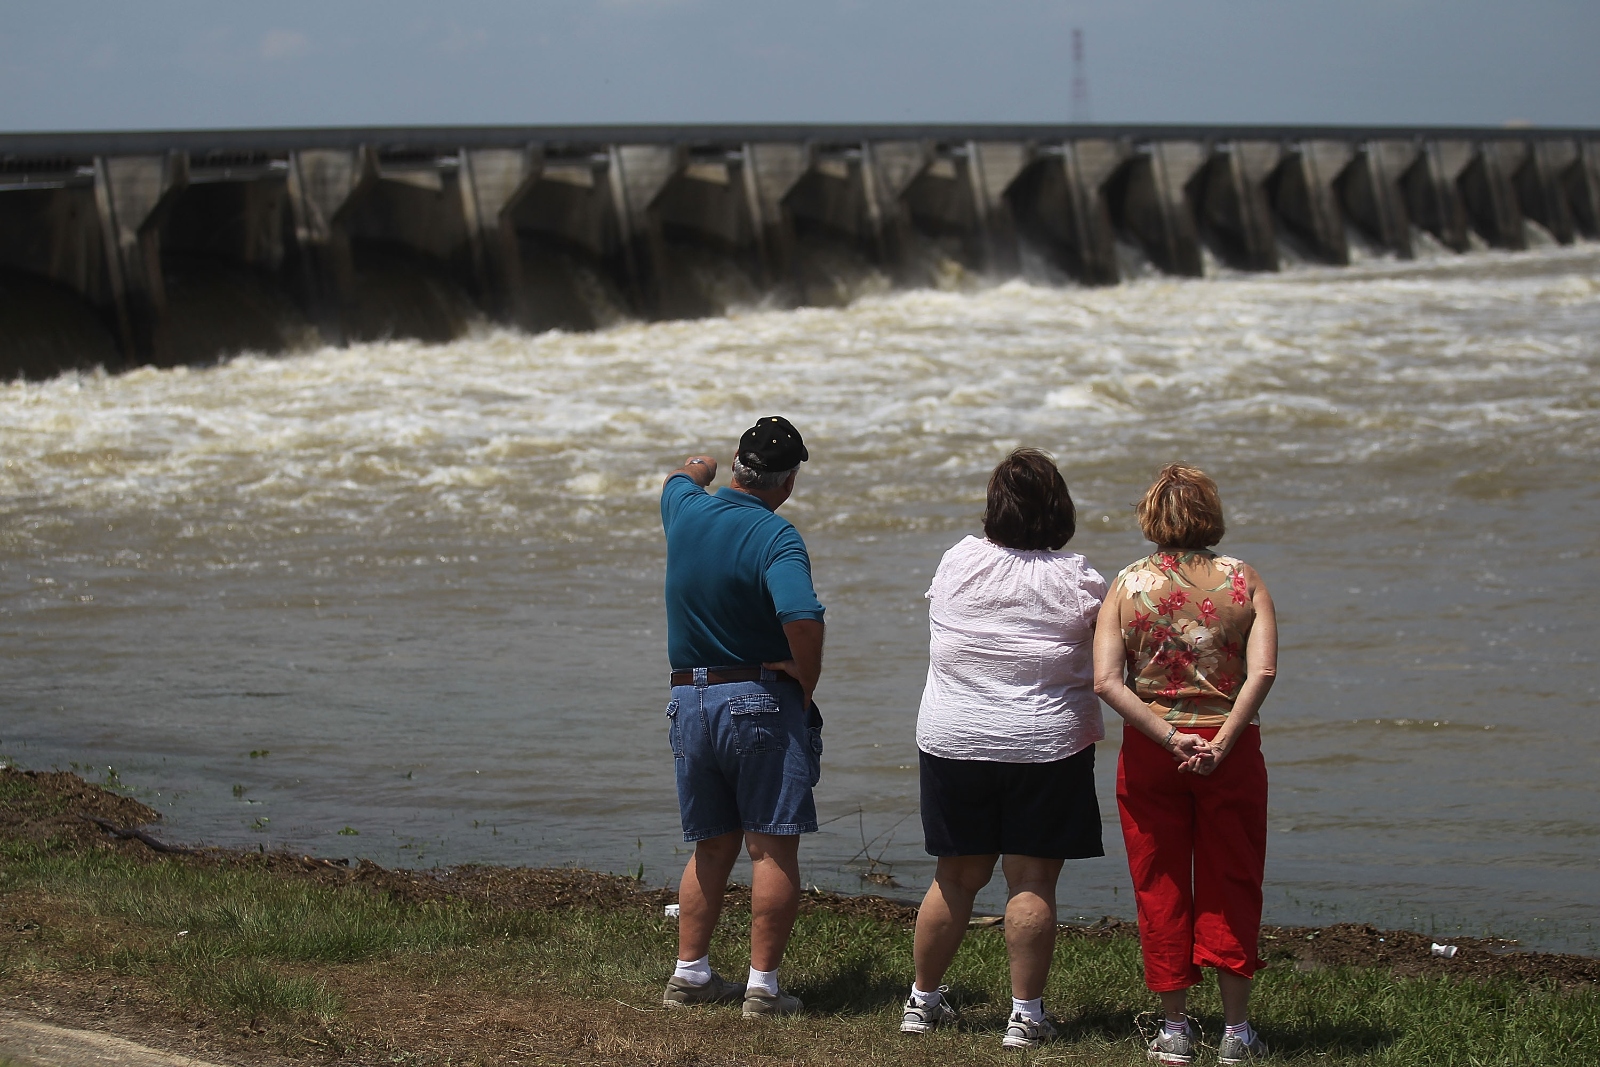 The Army Corps of Engineers opens the Bonnet Carre Spillway in southern Louisiana to divert floodwaters away from New Orleans. The agency has built numerous levees and control structures along the Mississippi River.